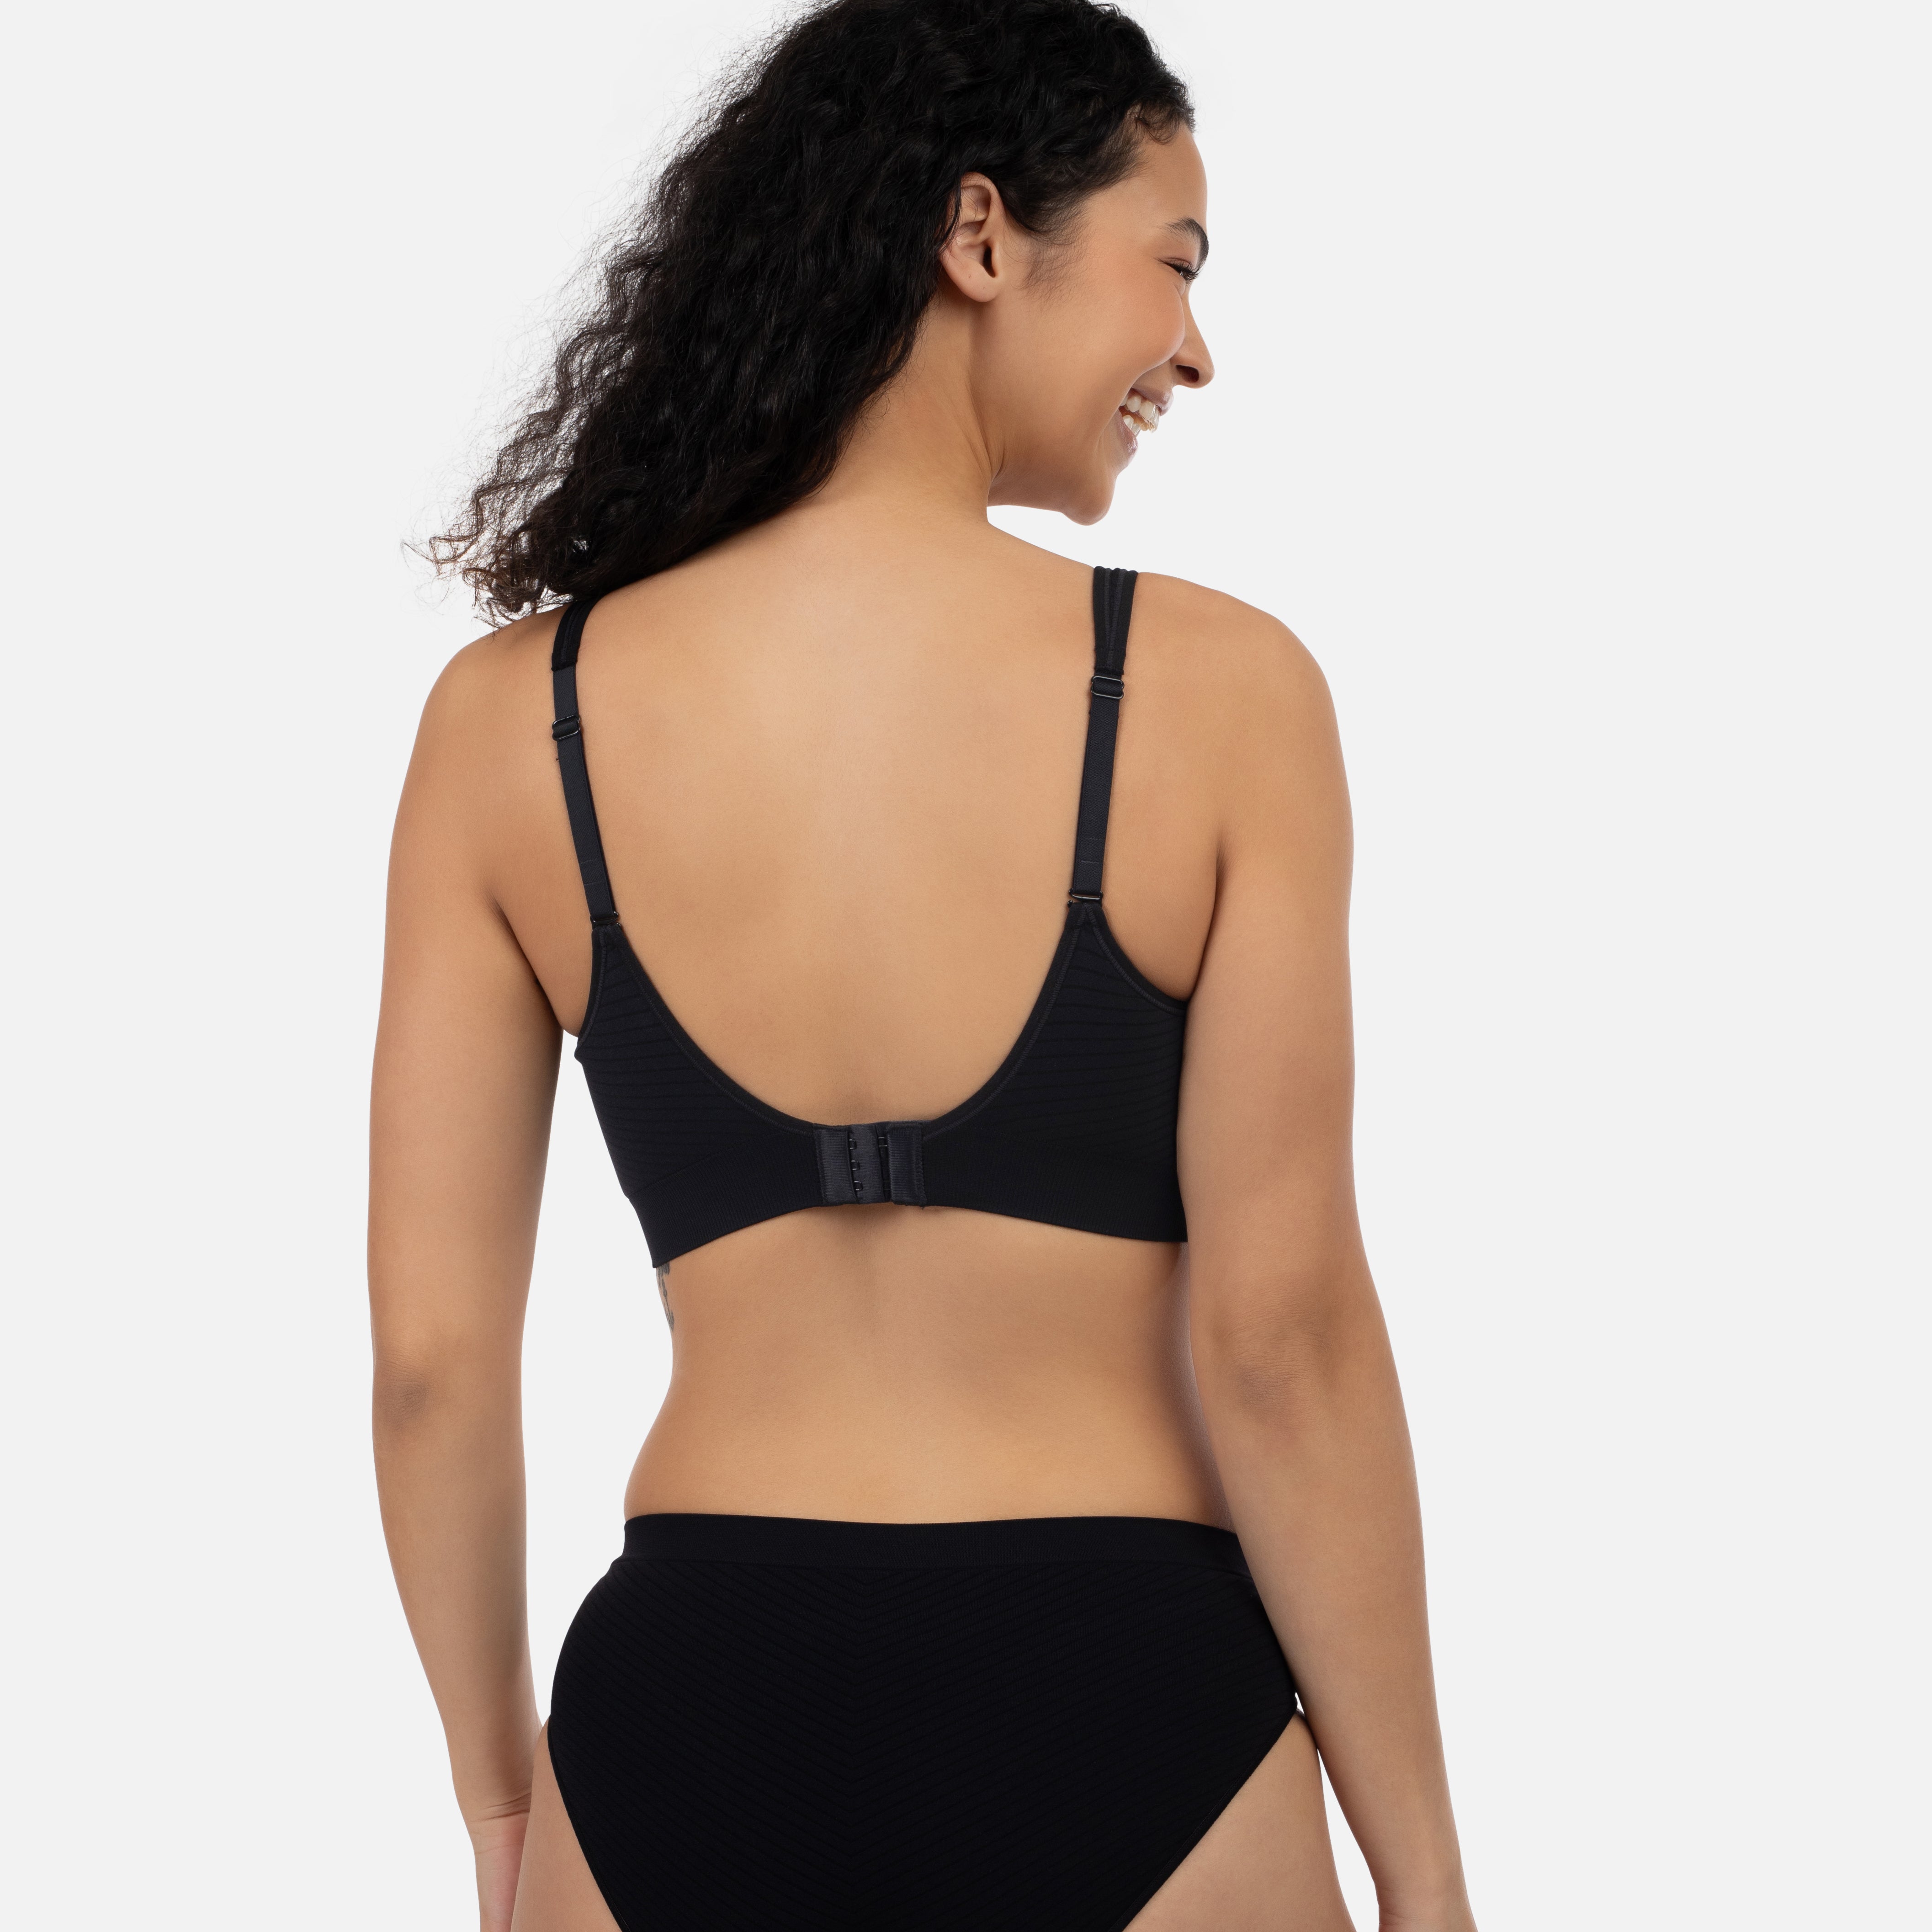 The Comfort Bra with Stripes